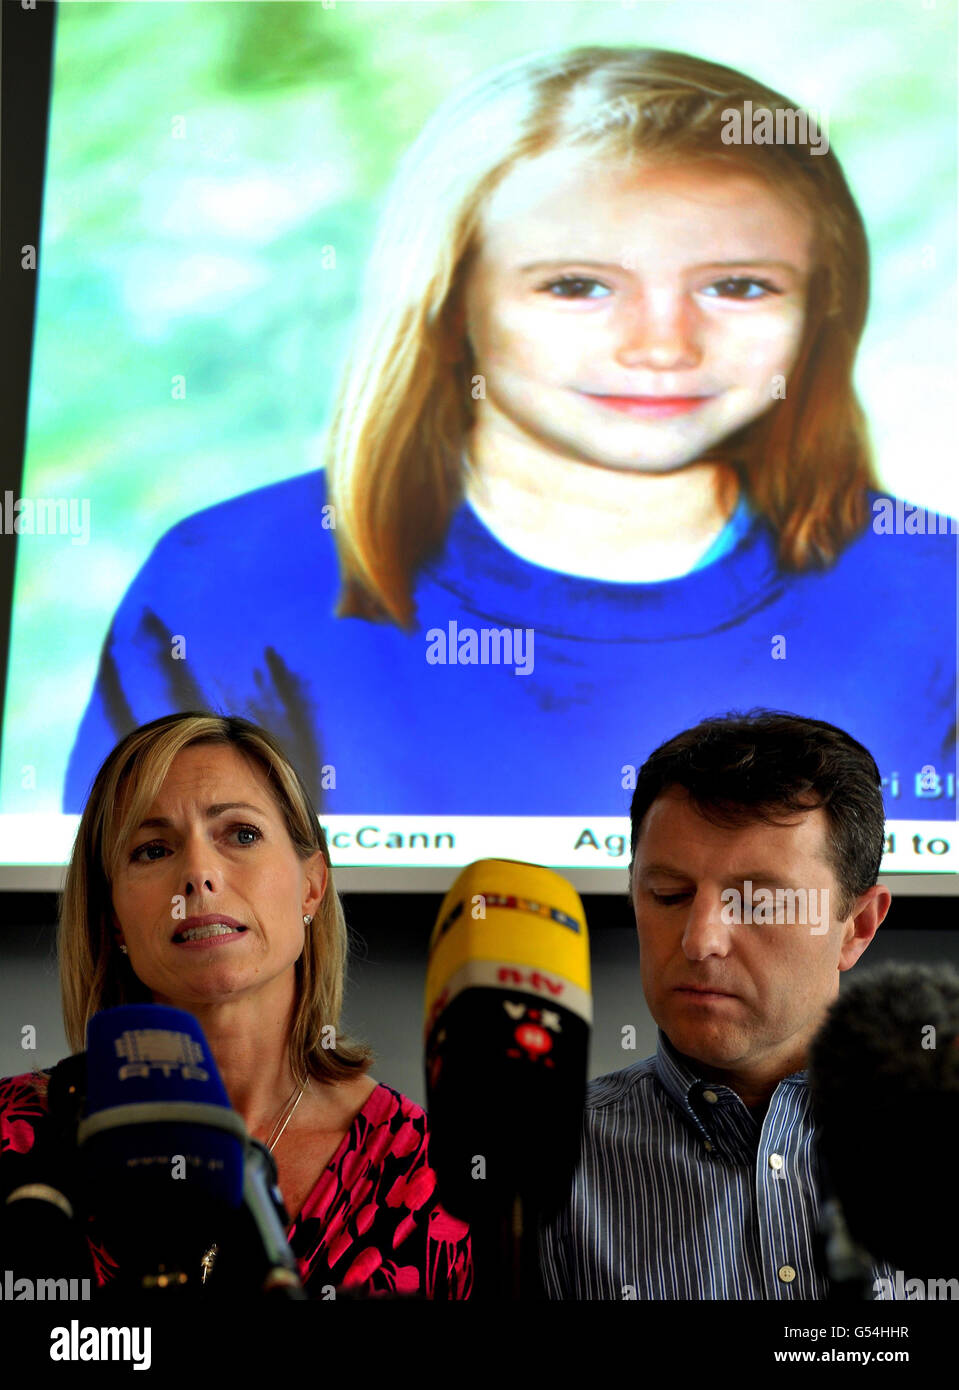 Gerry and Kate McCann whose daughter Madeline disappeared from a holiday flat in Portugal five years ago tomorrow, talk to the media at a press conference in London, where they are sat below a projection of what Madeline might look like today. Stock Photo